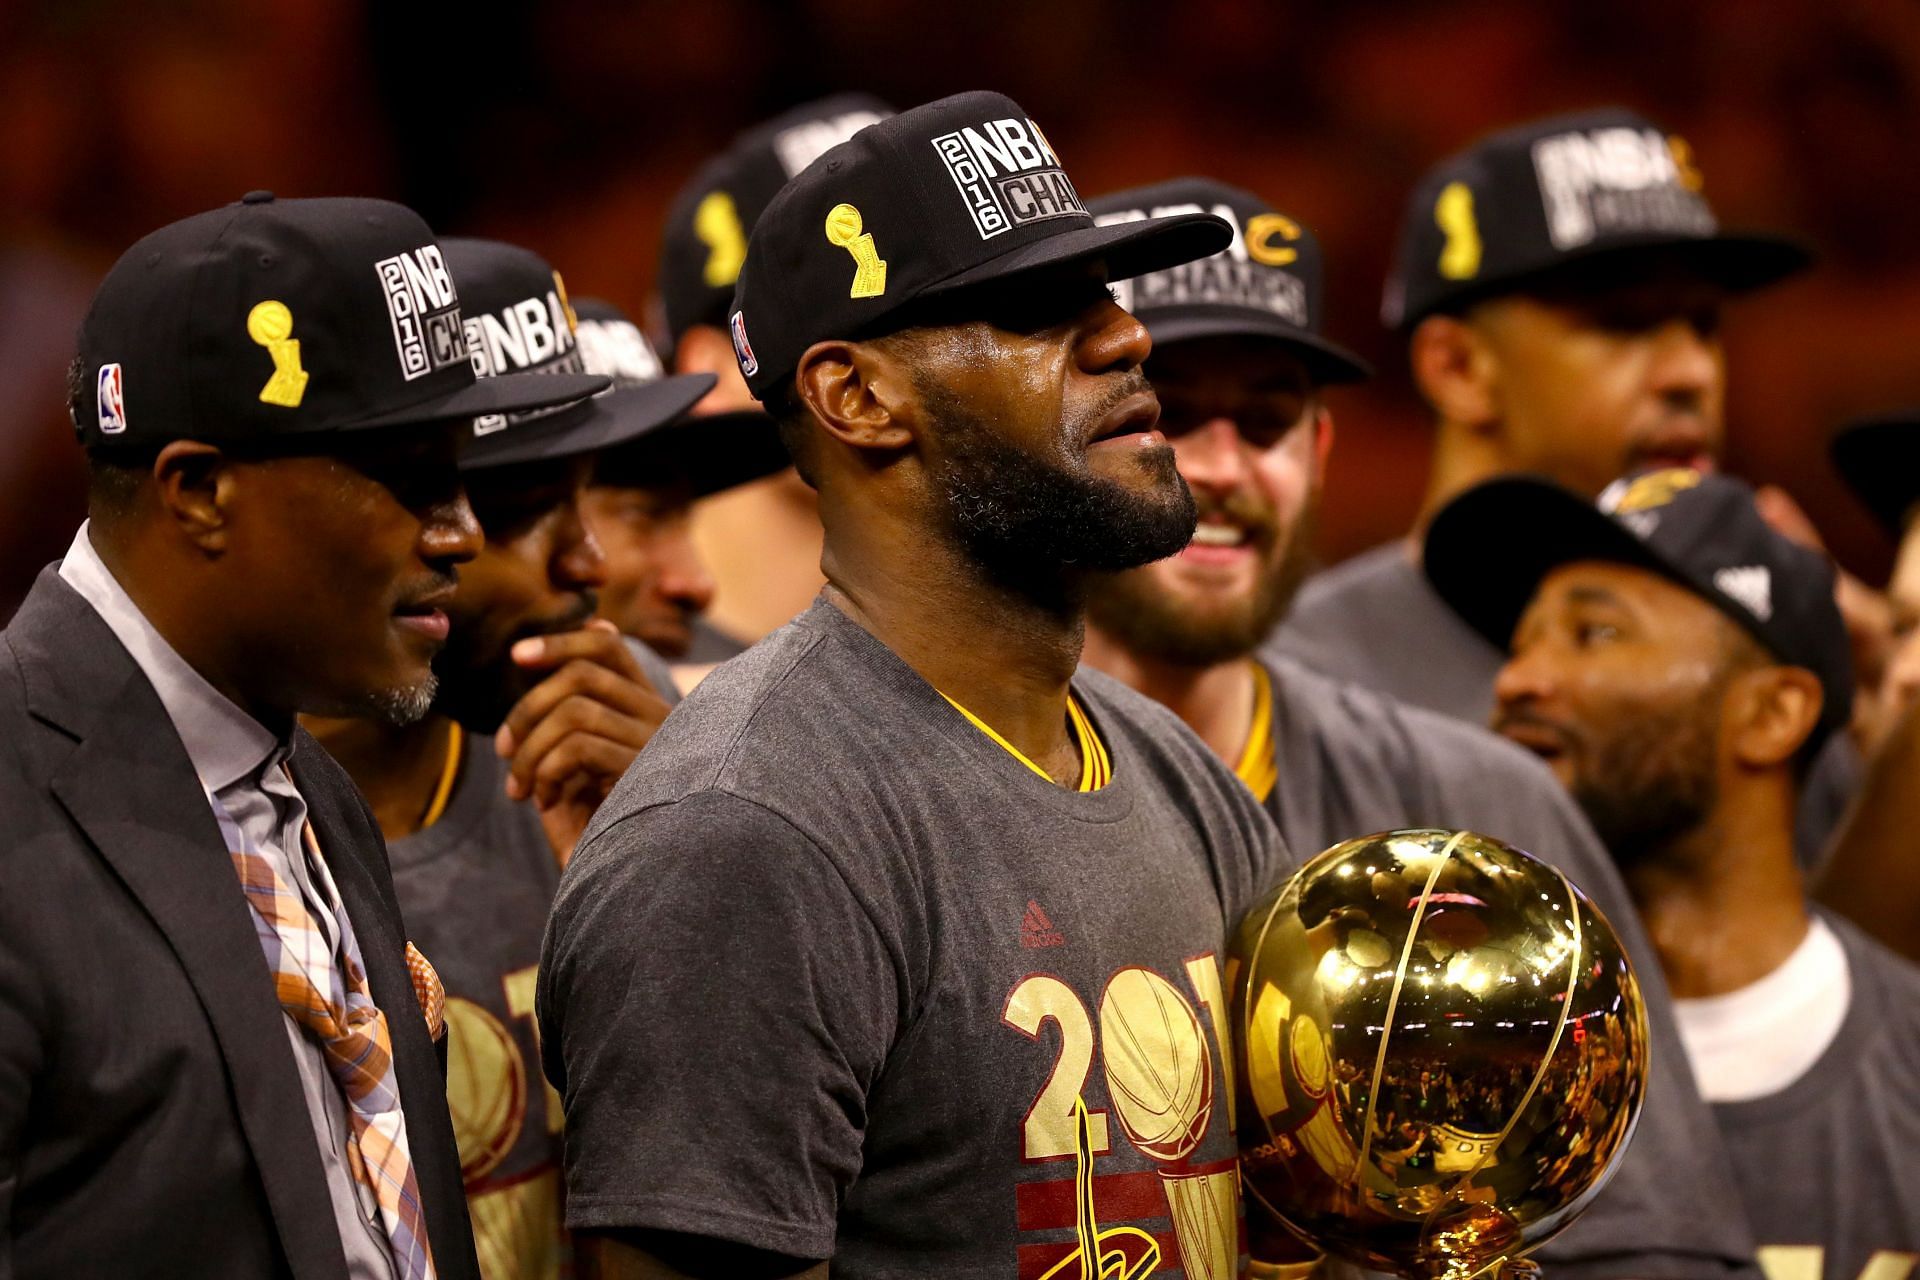 King James with the championship after the 2016 NBA Finals